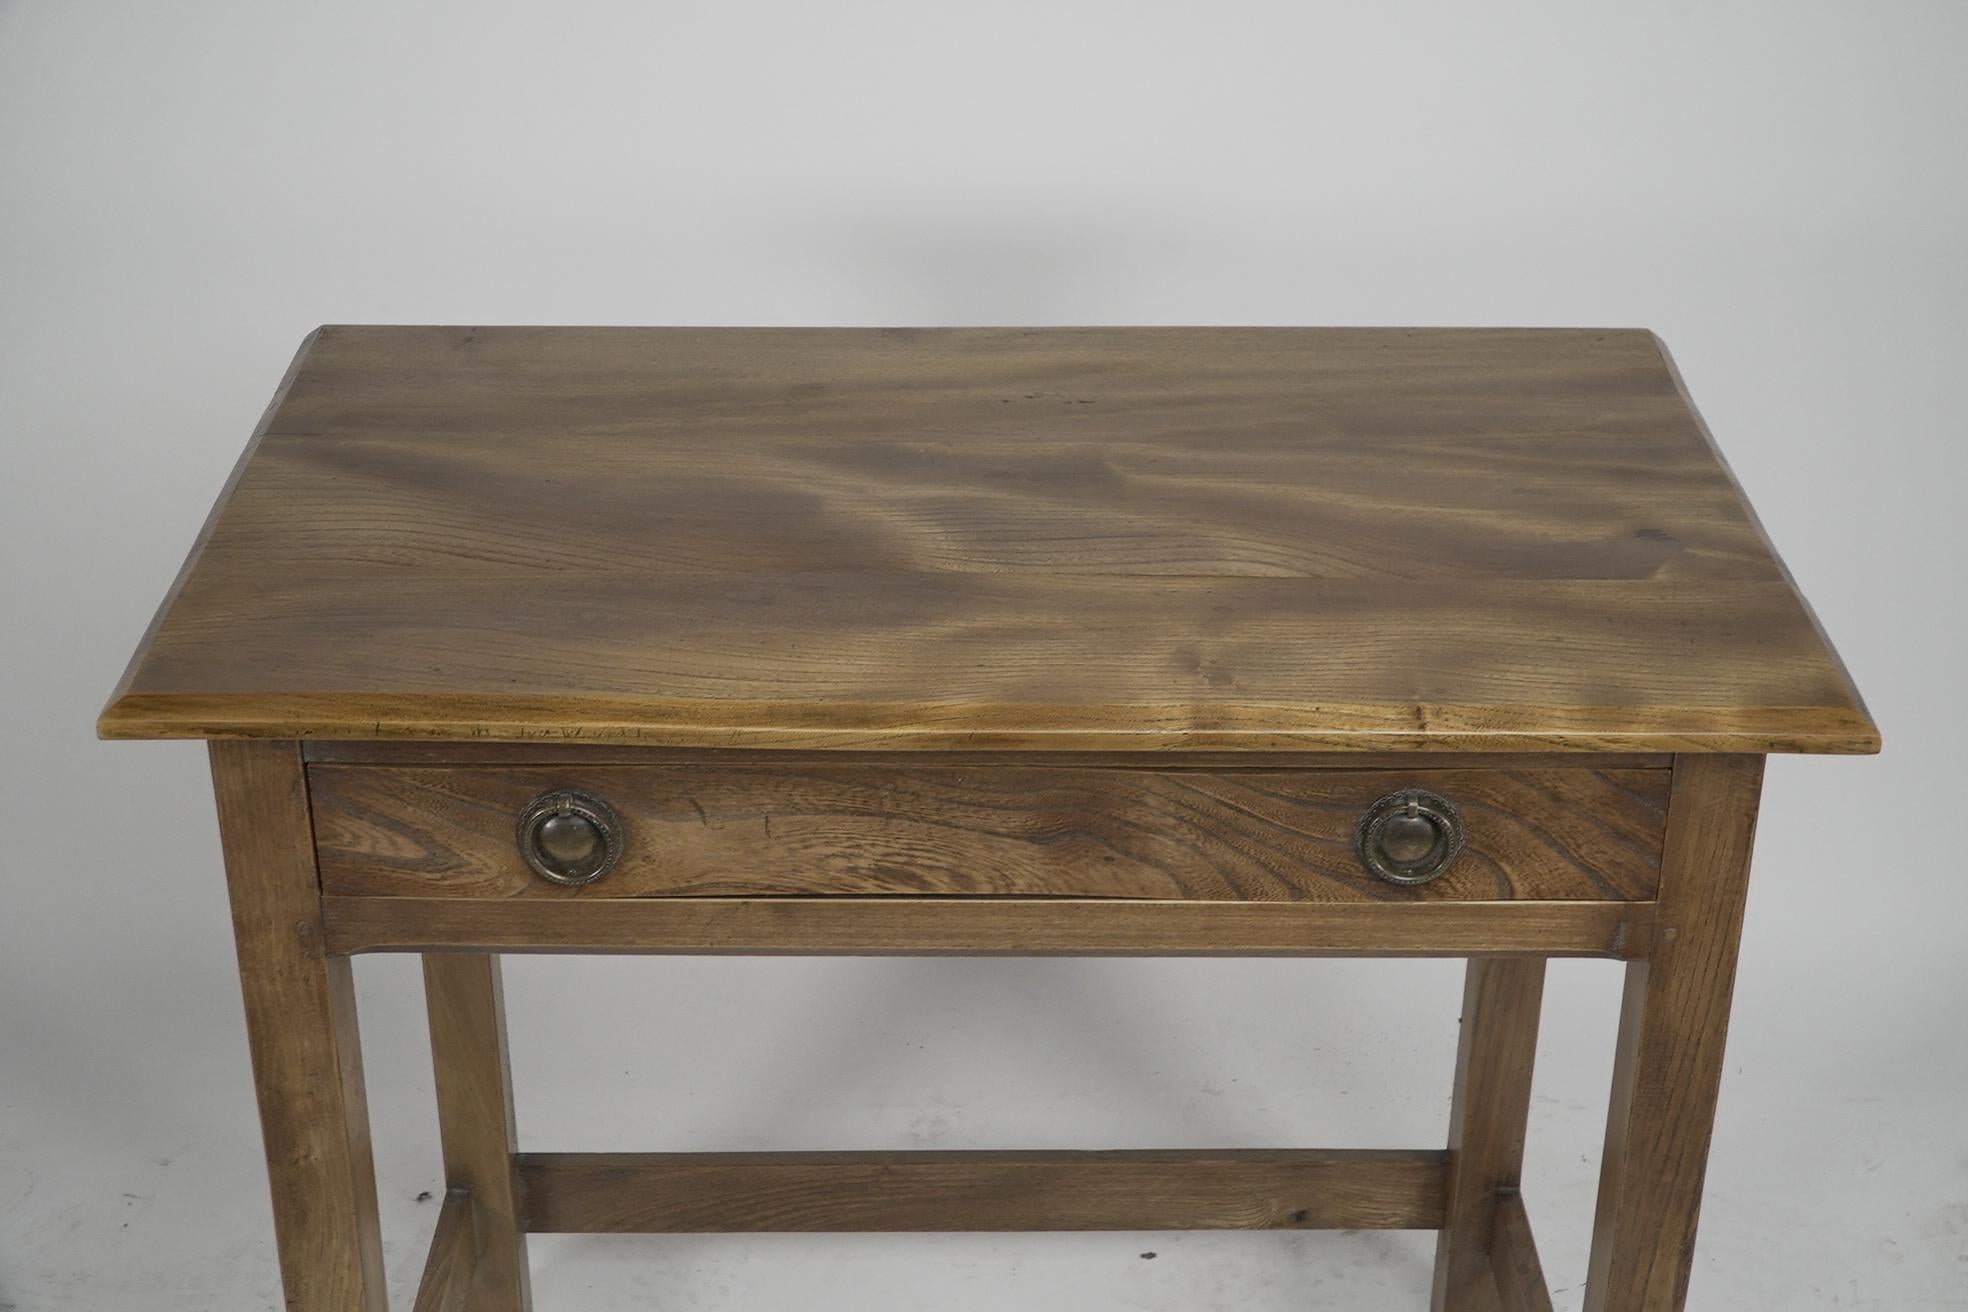 Gordon Russell. A fine quality Cotswold School ash single drawer desk. With brass Gordon Russel Ltd. Broadway Worcs to the back. This timeless piece of Cotswold history is fit for purpose with no front stretcher giving you all the legroom necesary